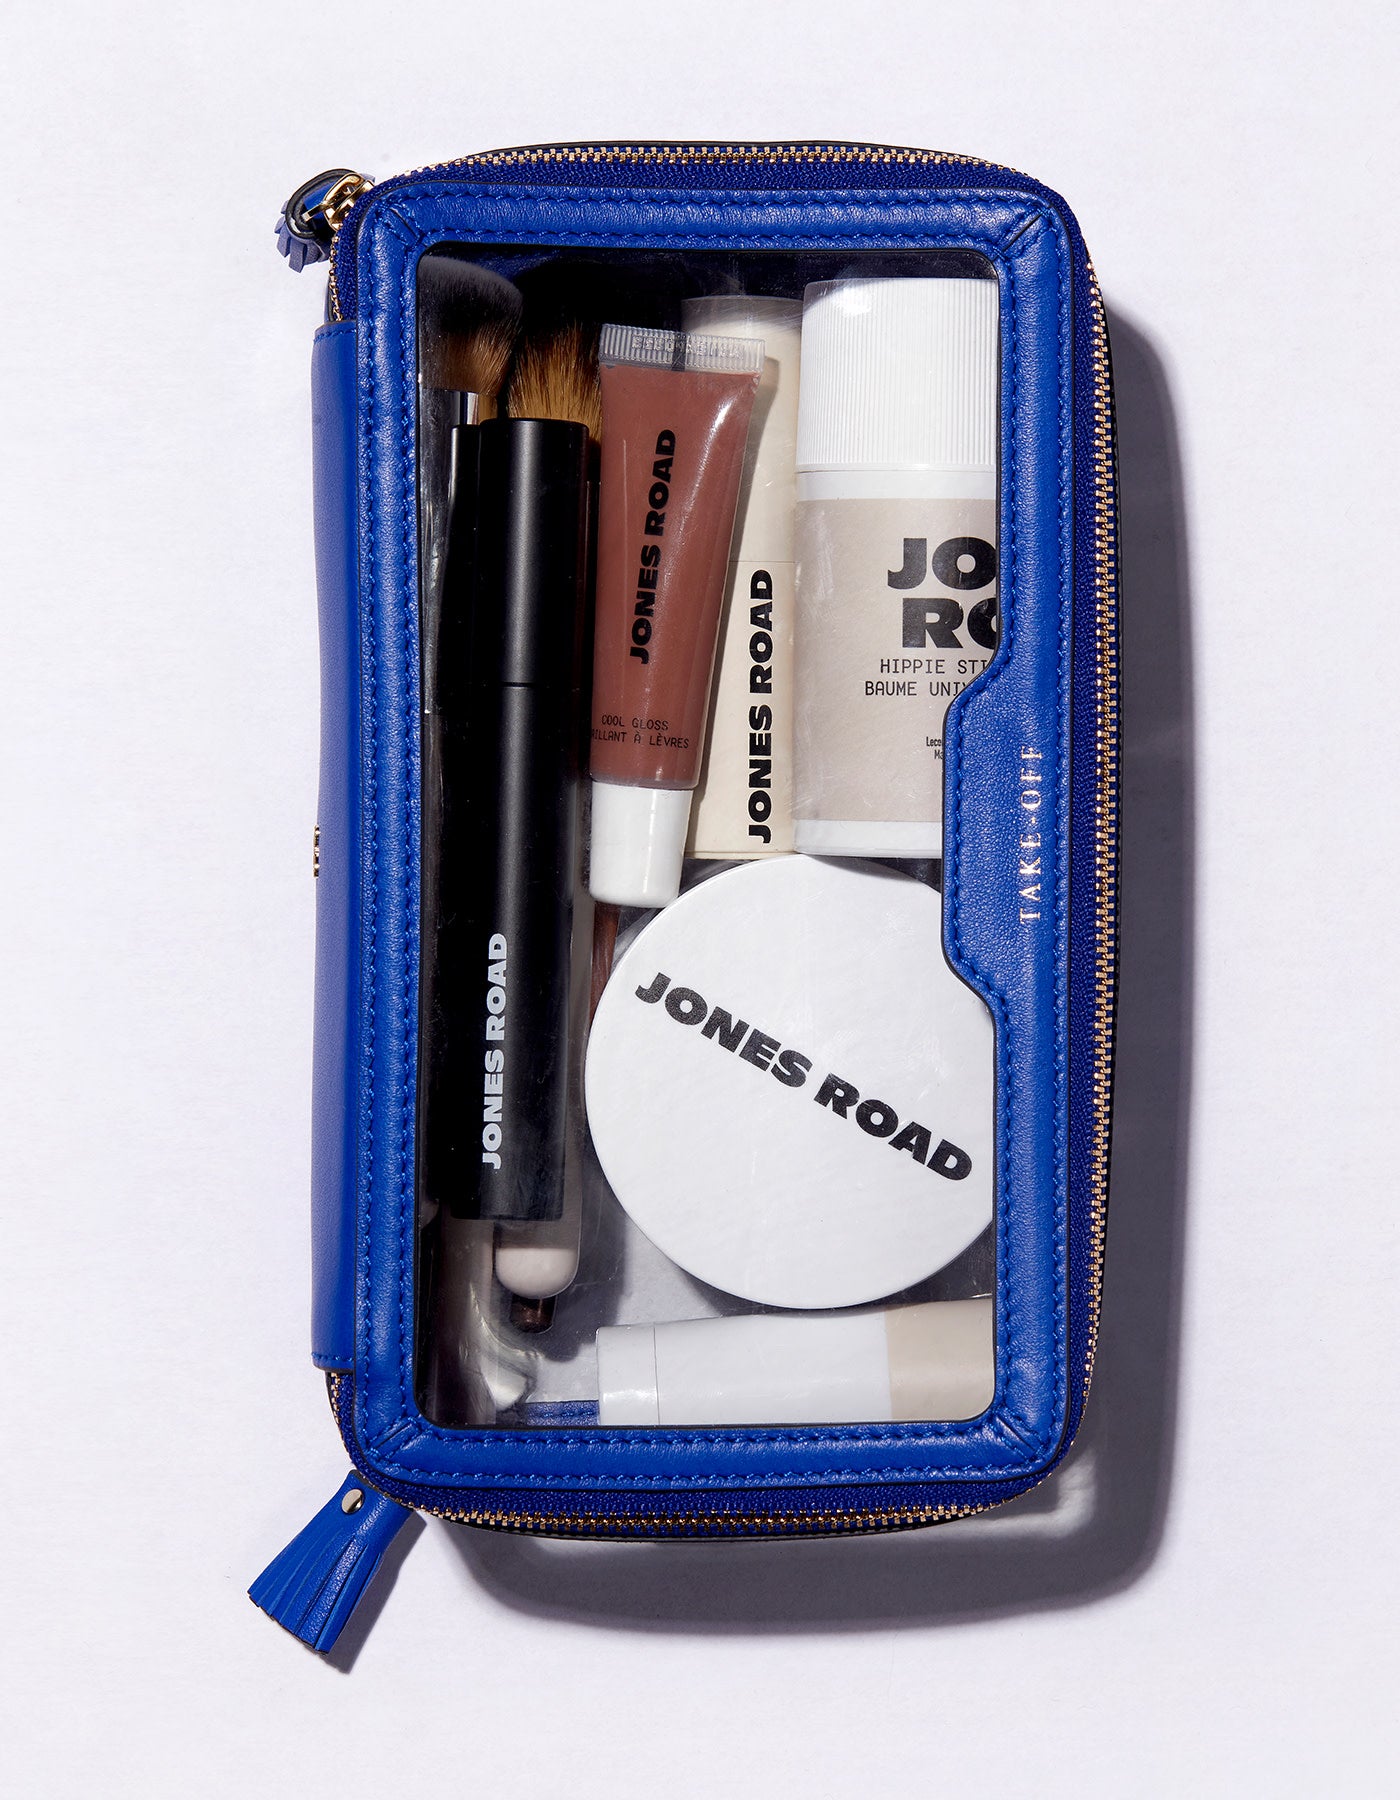 How to clean any type of makeup bag